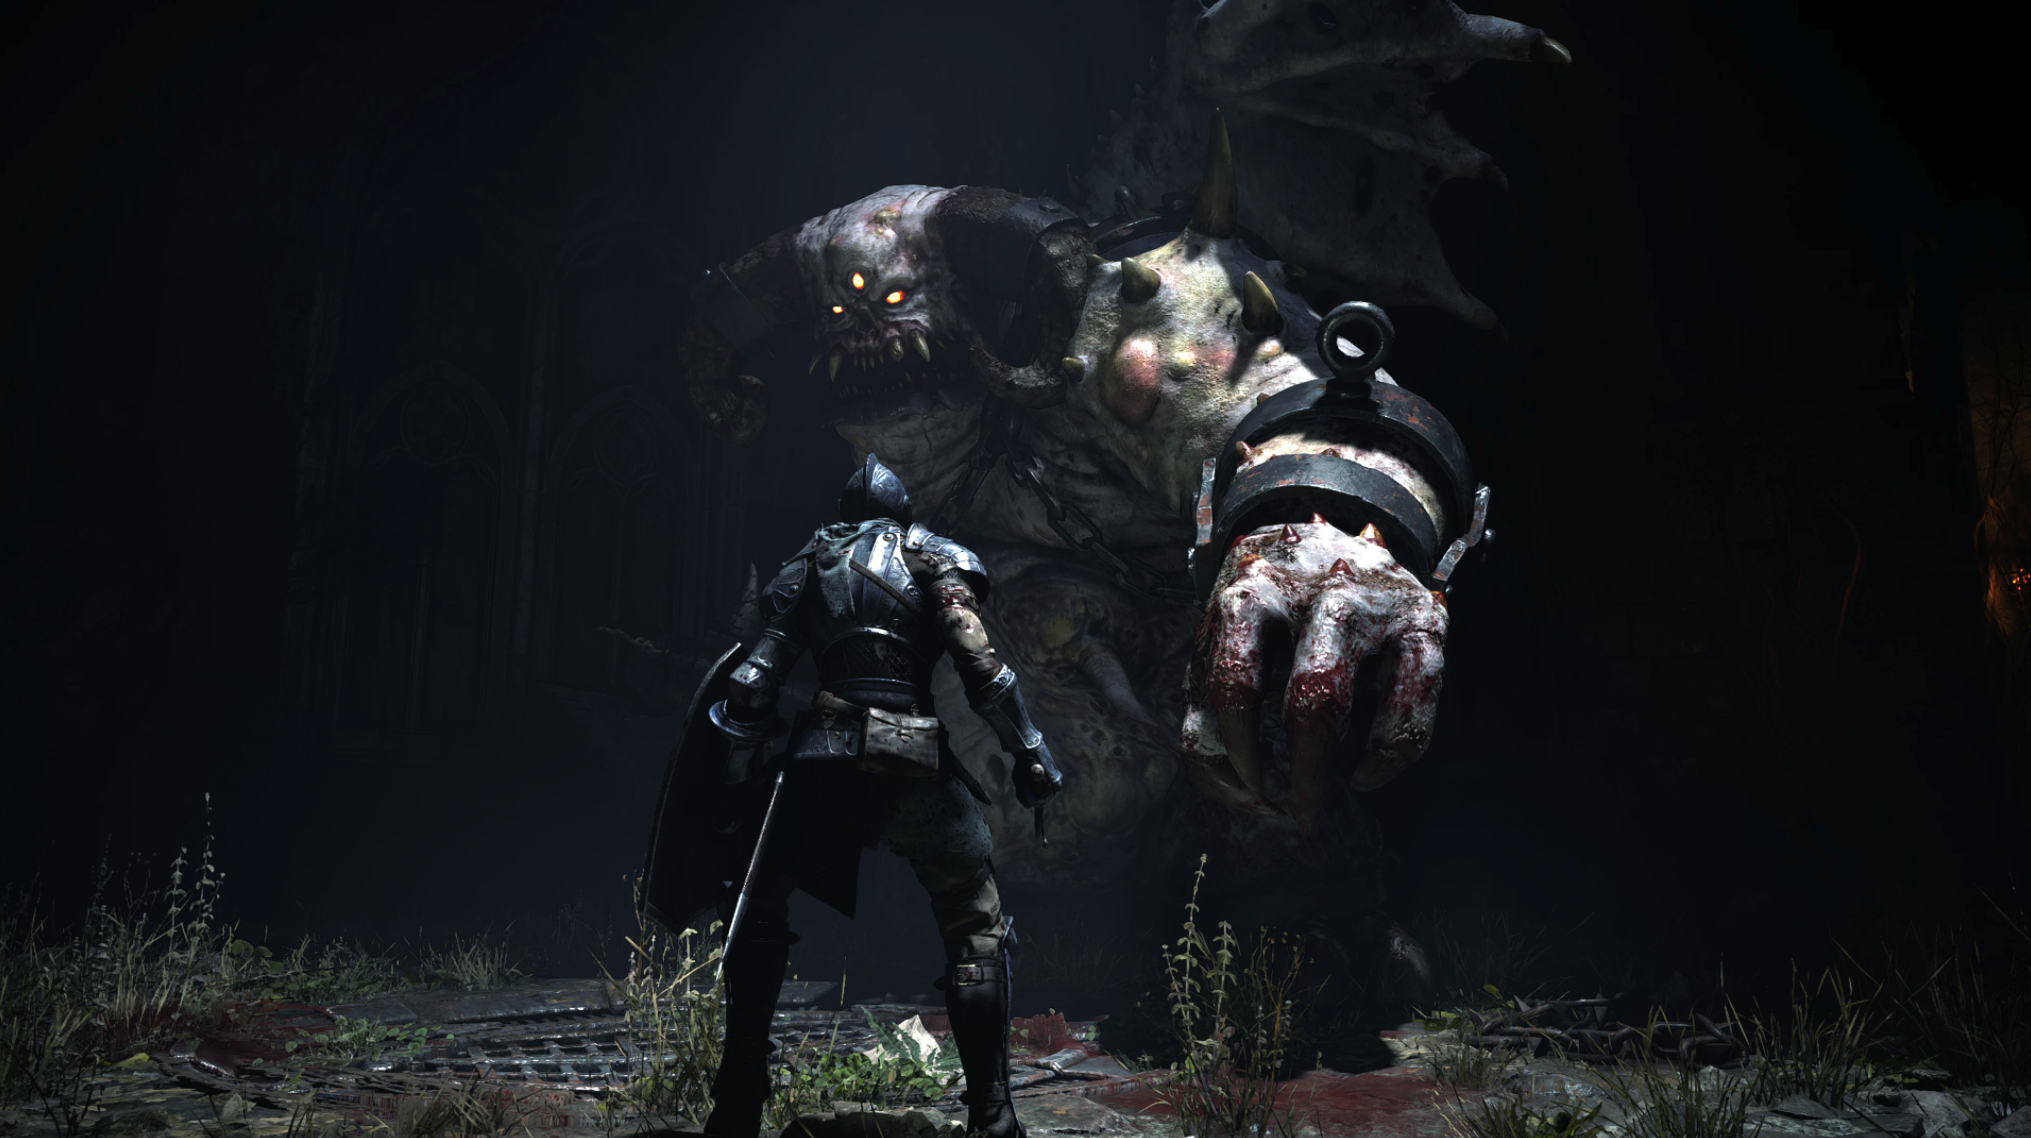 The player staring down a giant demon stepping out of the shadows.